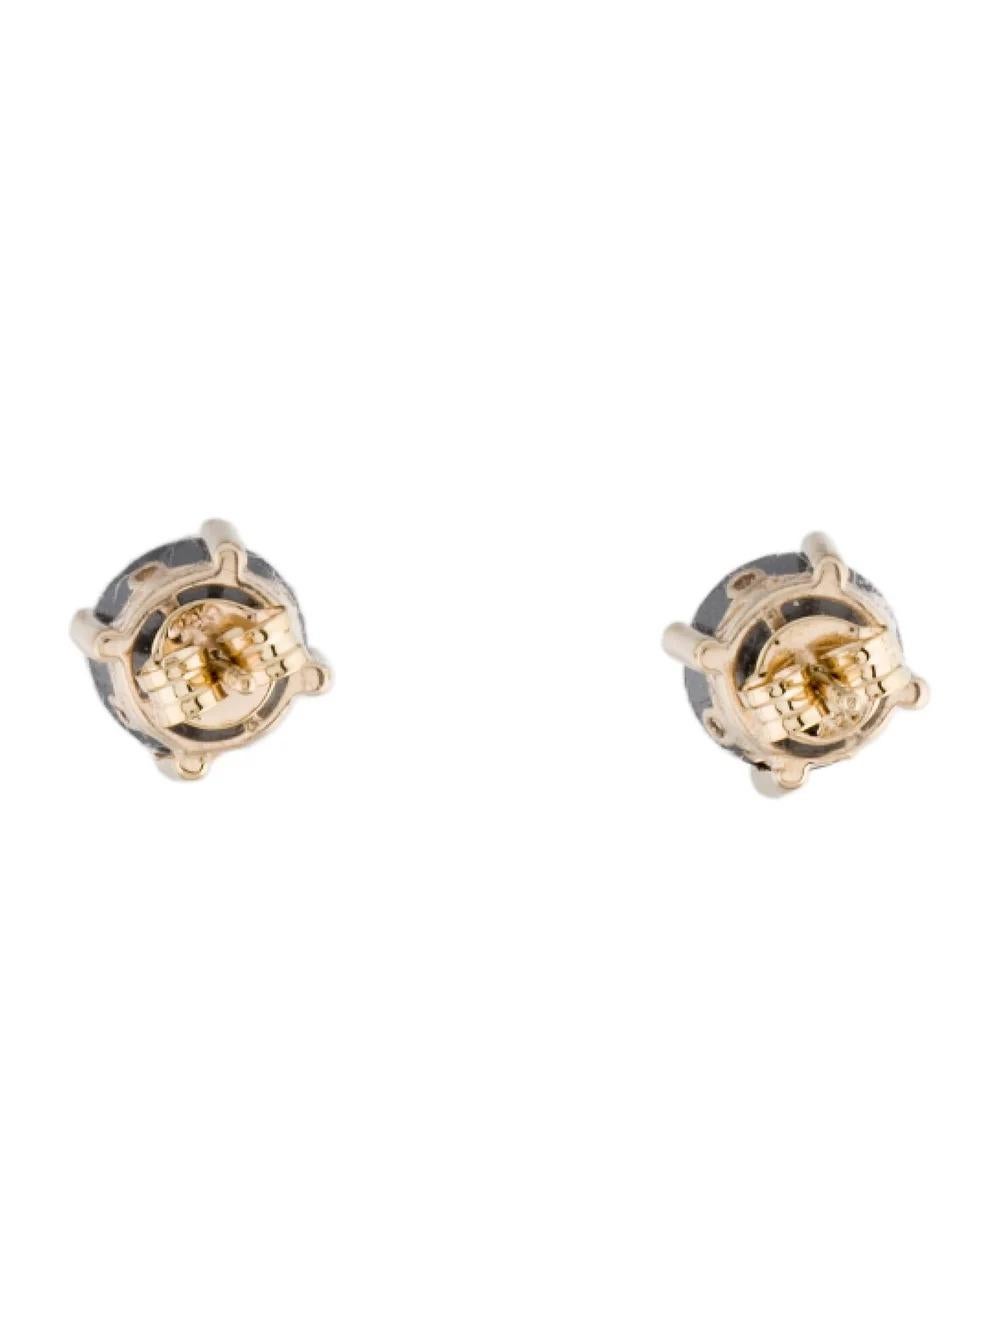 14K Diamond Stud Earrings 6.14ctw - Timeless & Elegant Statement Jewelry, Luxury In New Condition For Sale In Holtsville, NY